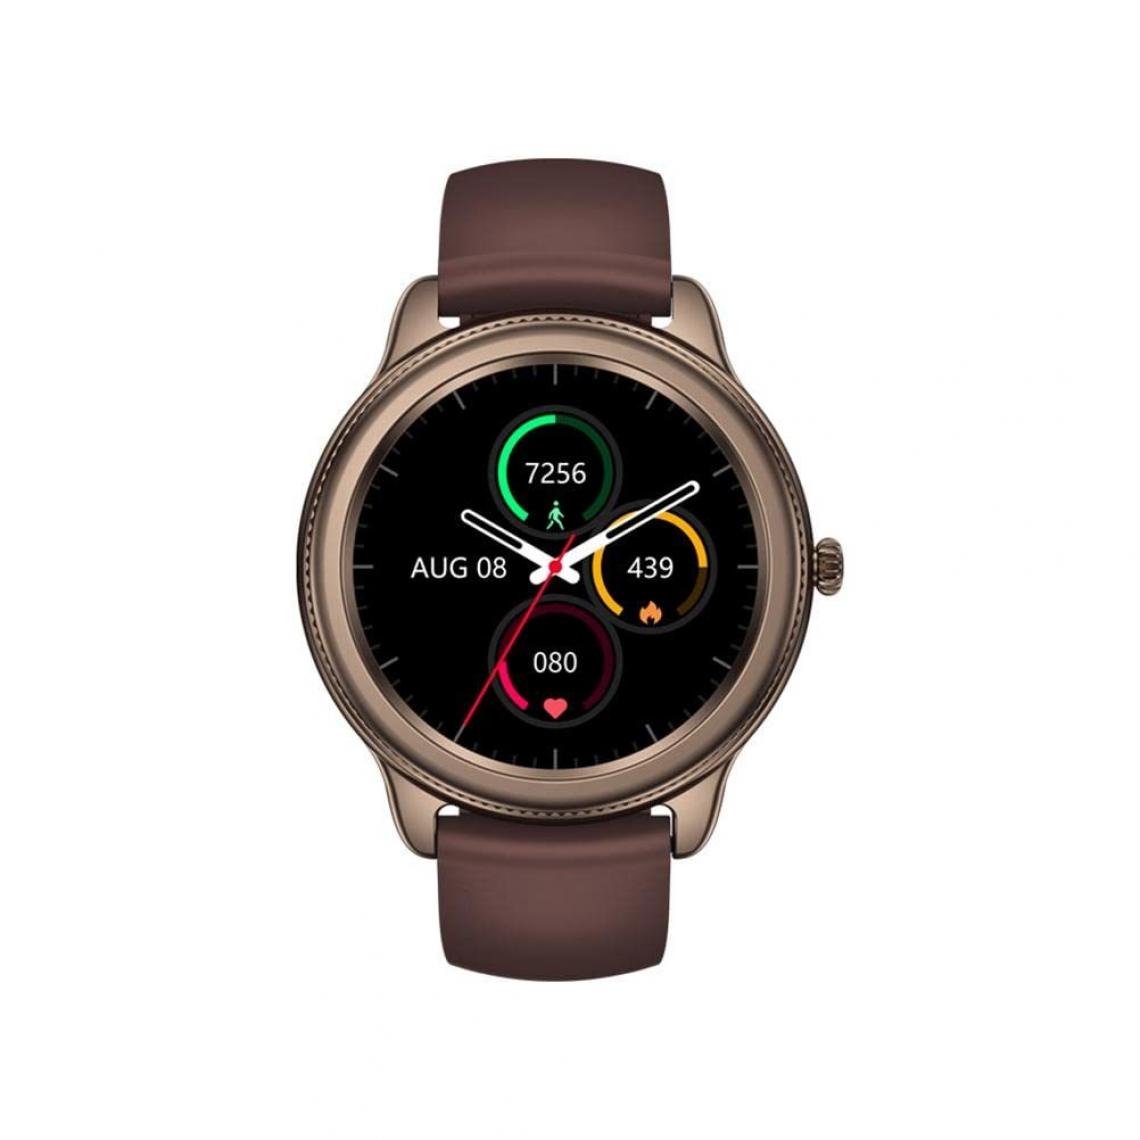 Chronotech Montres - Bracelet Smart Watch, Android iOS Compatible, IP68 Waterproof Fitness & Sleep Detection, Suitable for Sports, Work (Brown) - Montre connectée